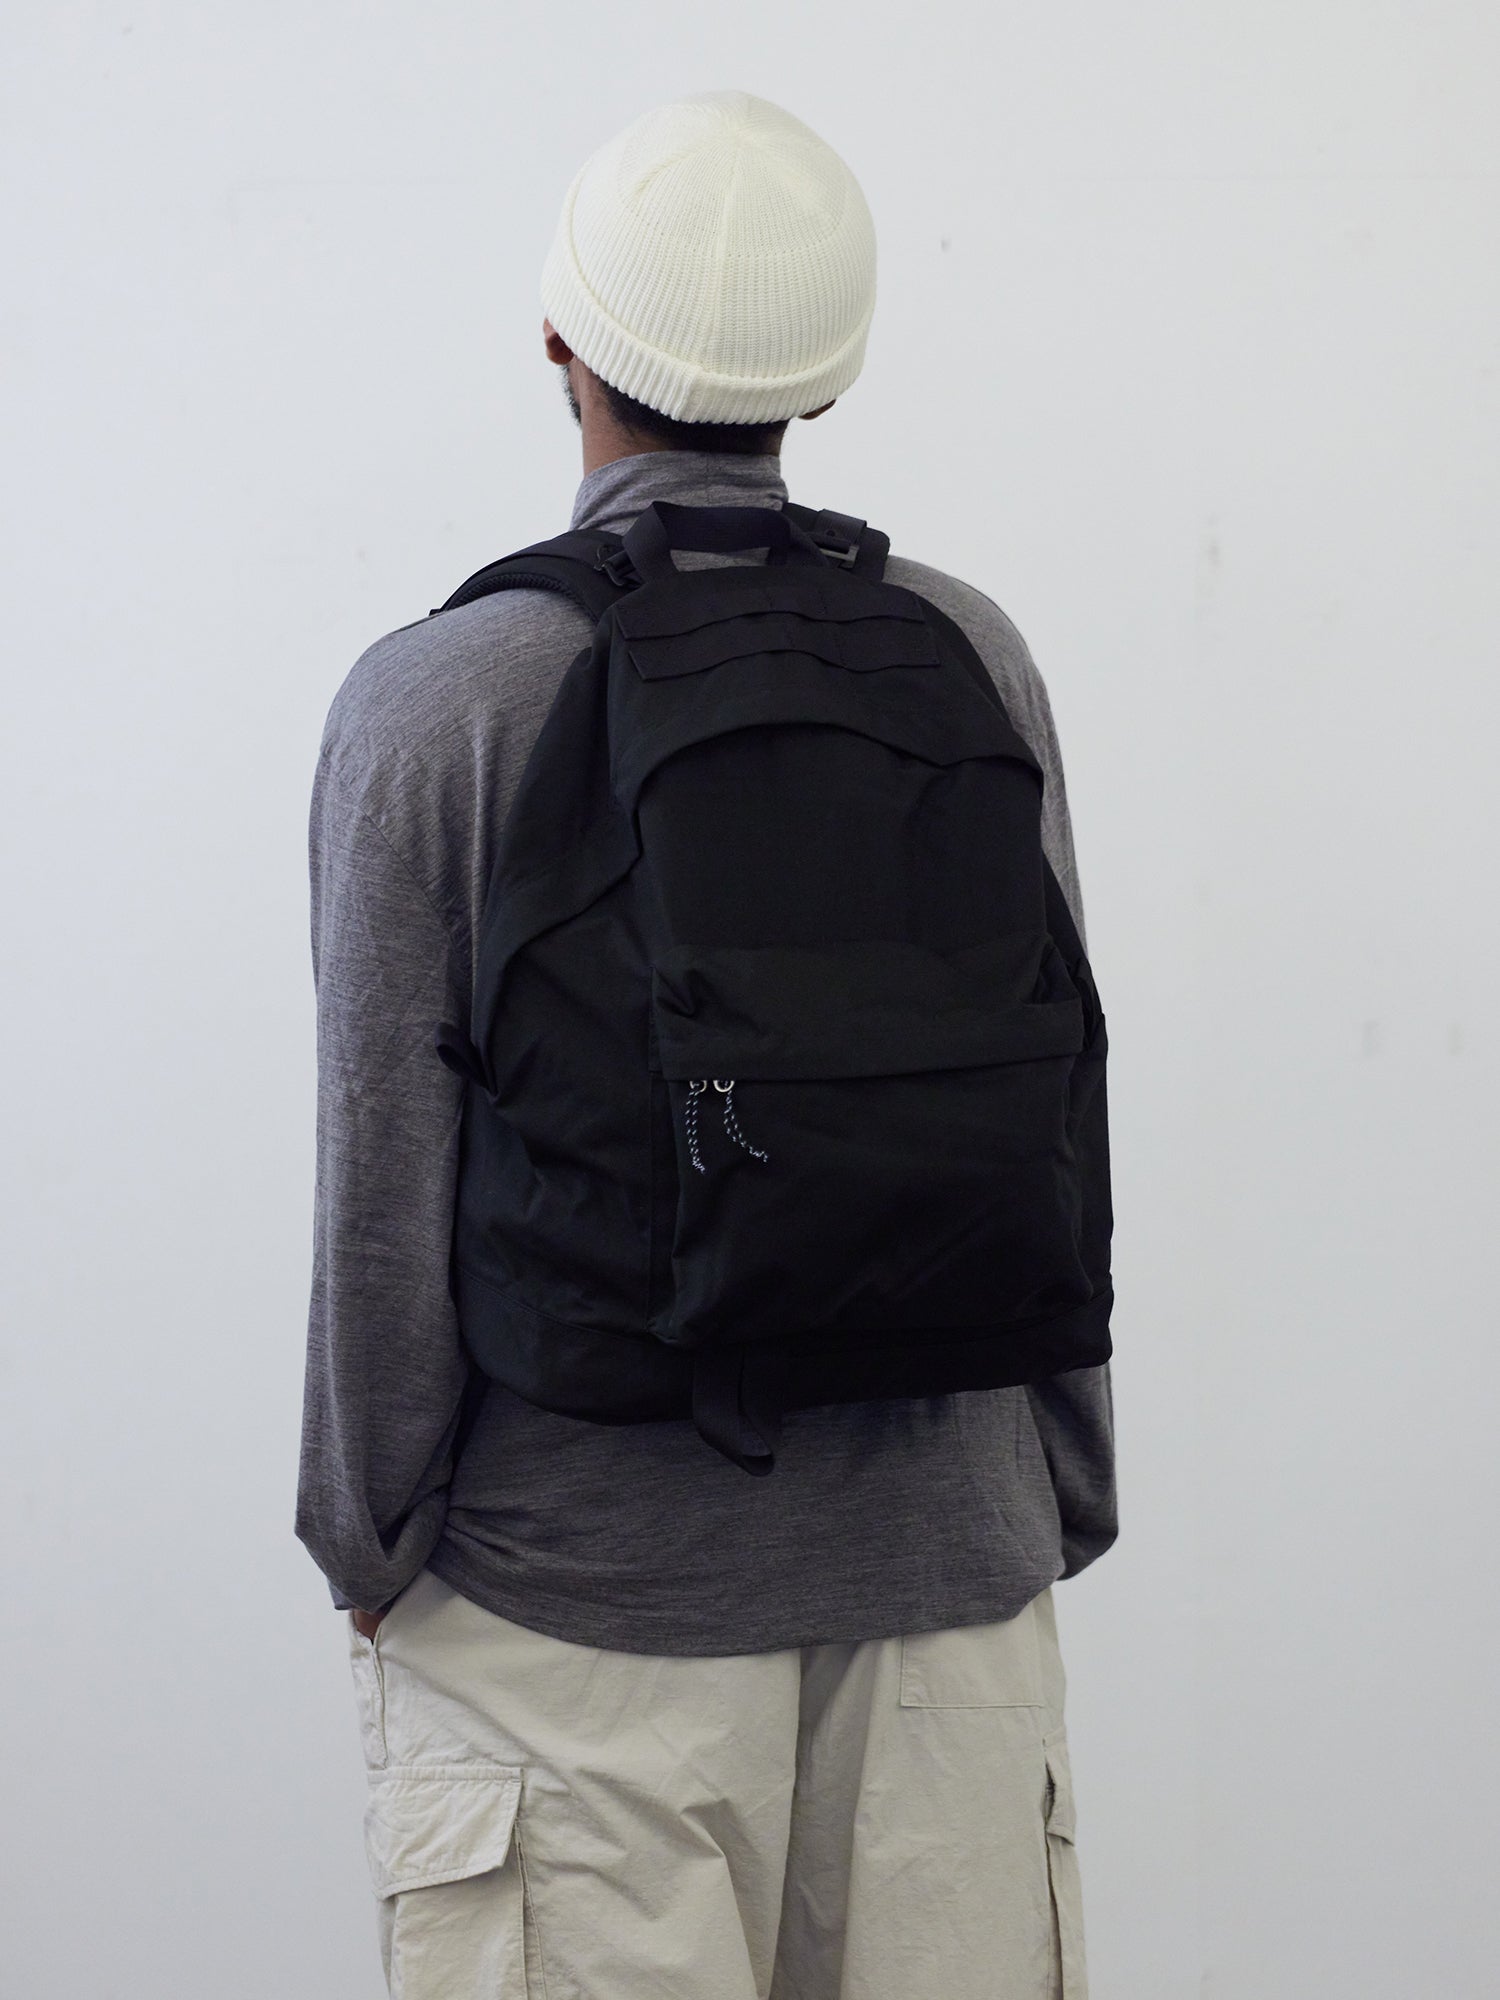 ENDS and MEANS DAYTRIP BACKPACK | www.hurdl.org